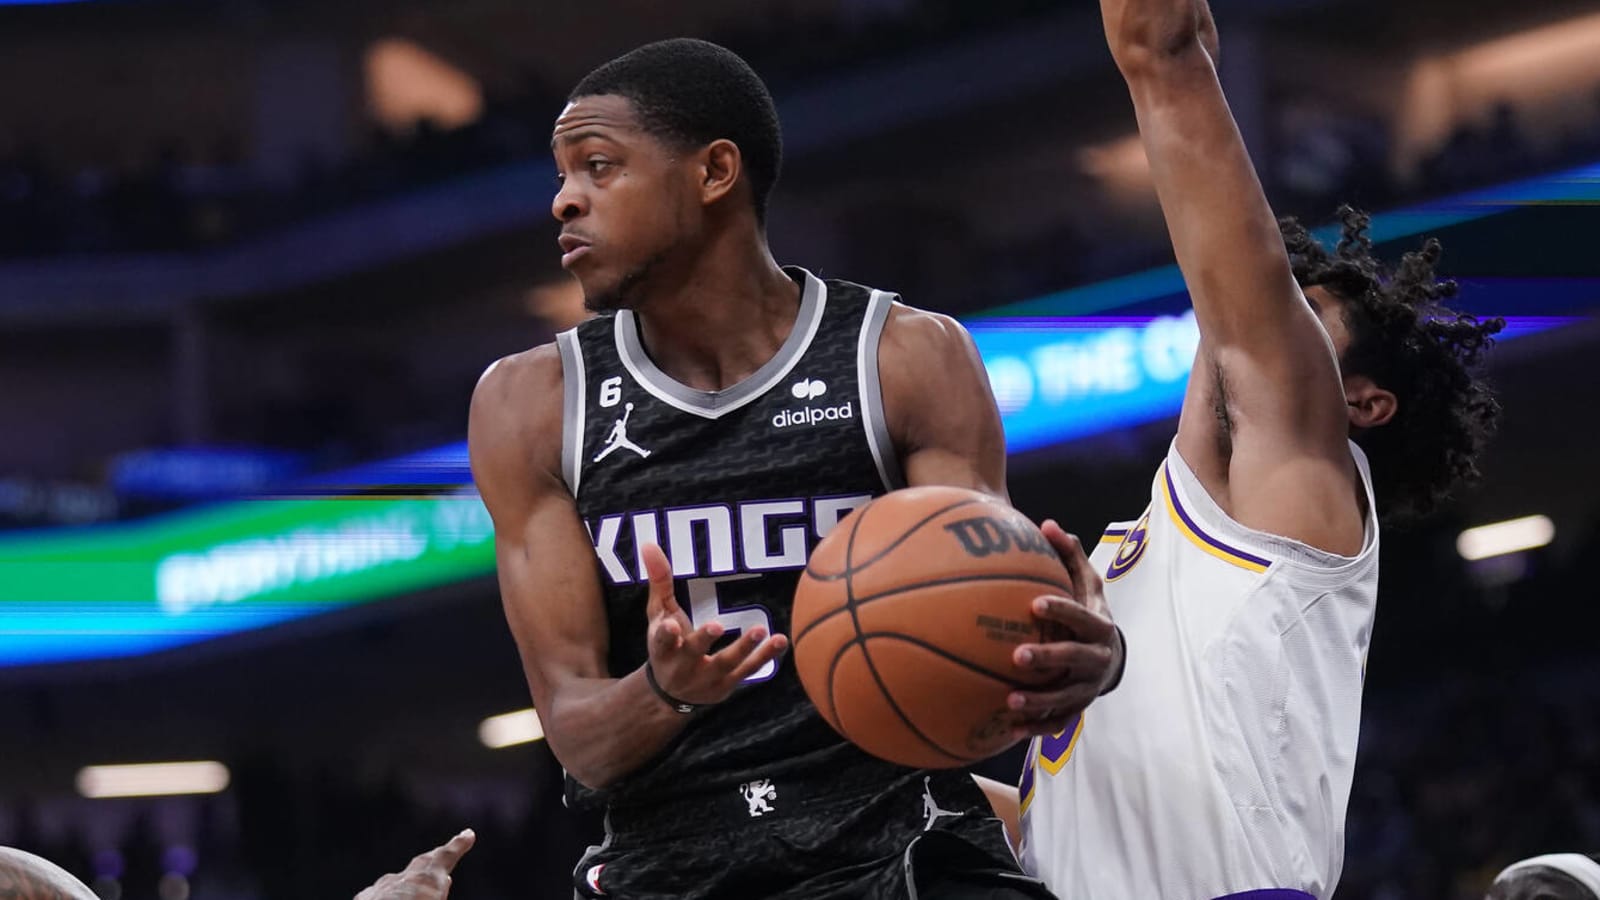 De’Aaron Fox ripped referees in tweet after loss to Lakers